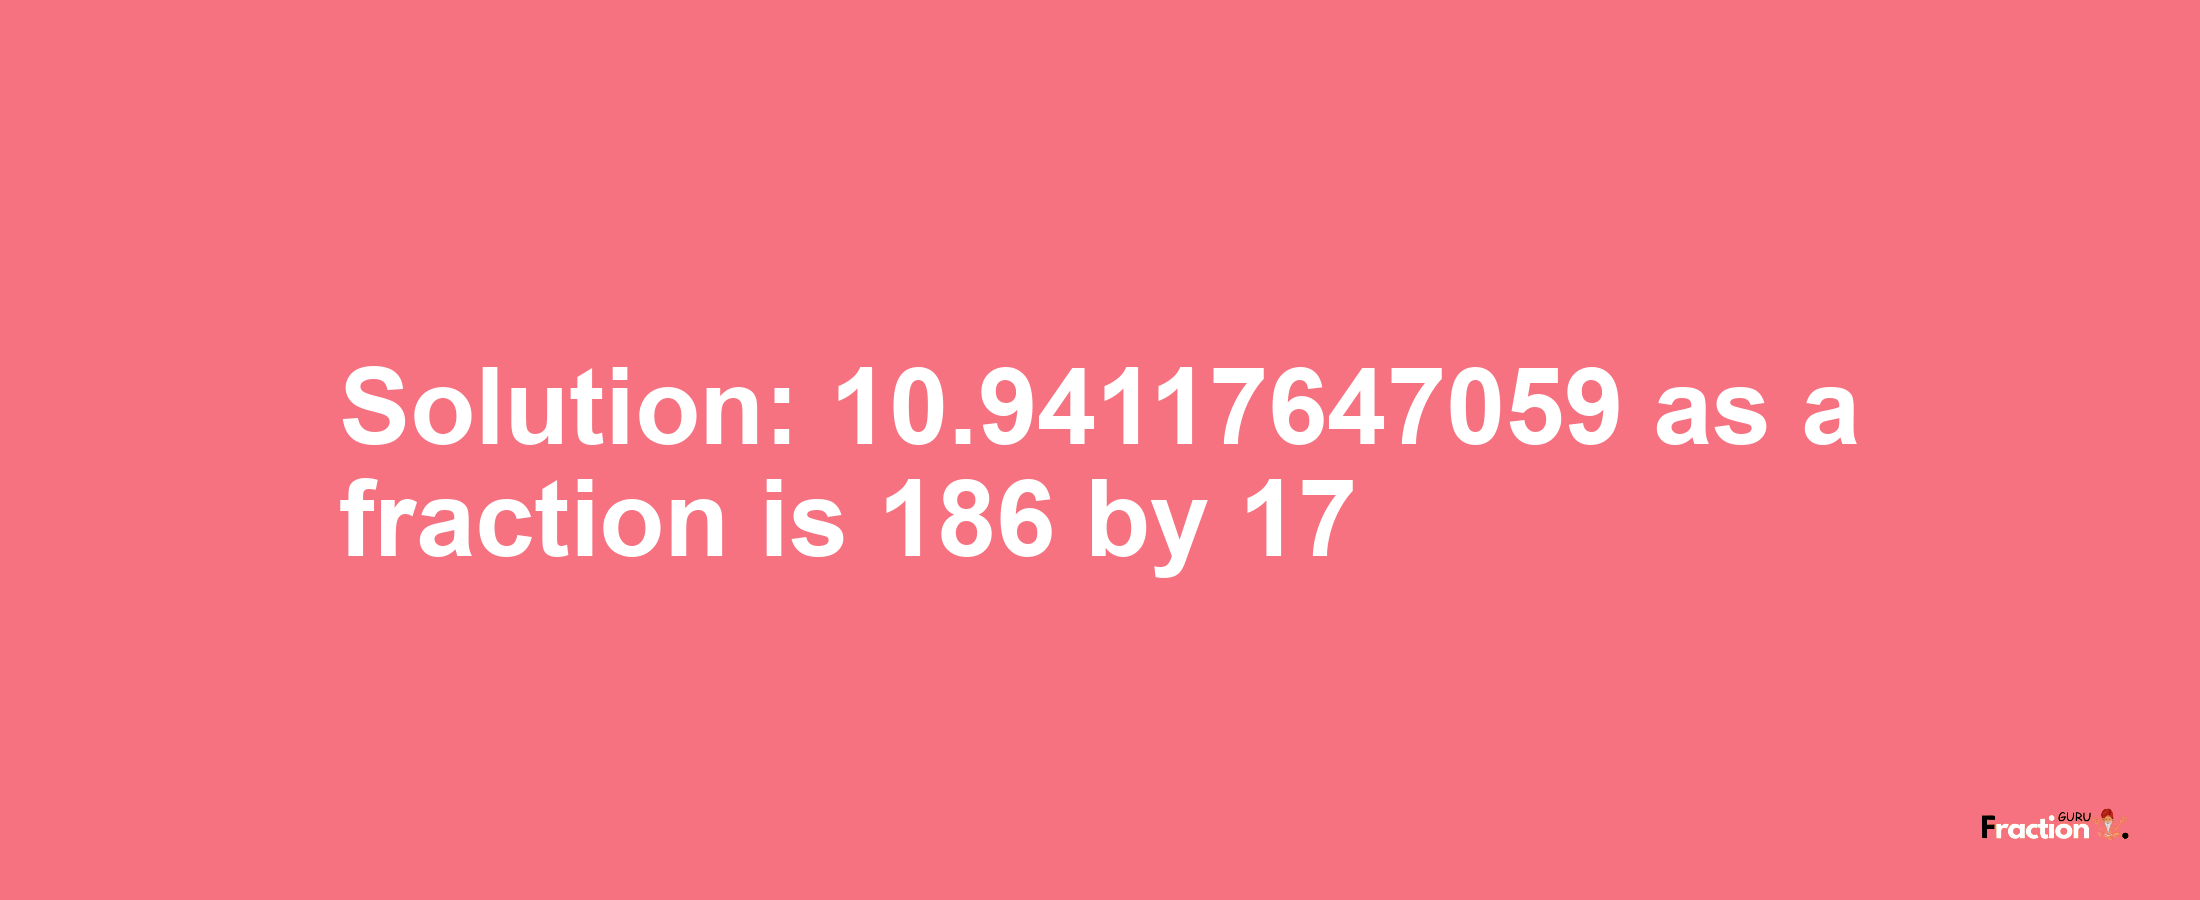 Solution:10.94117647059 as a fraction is 186/17